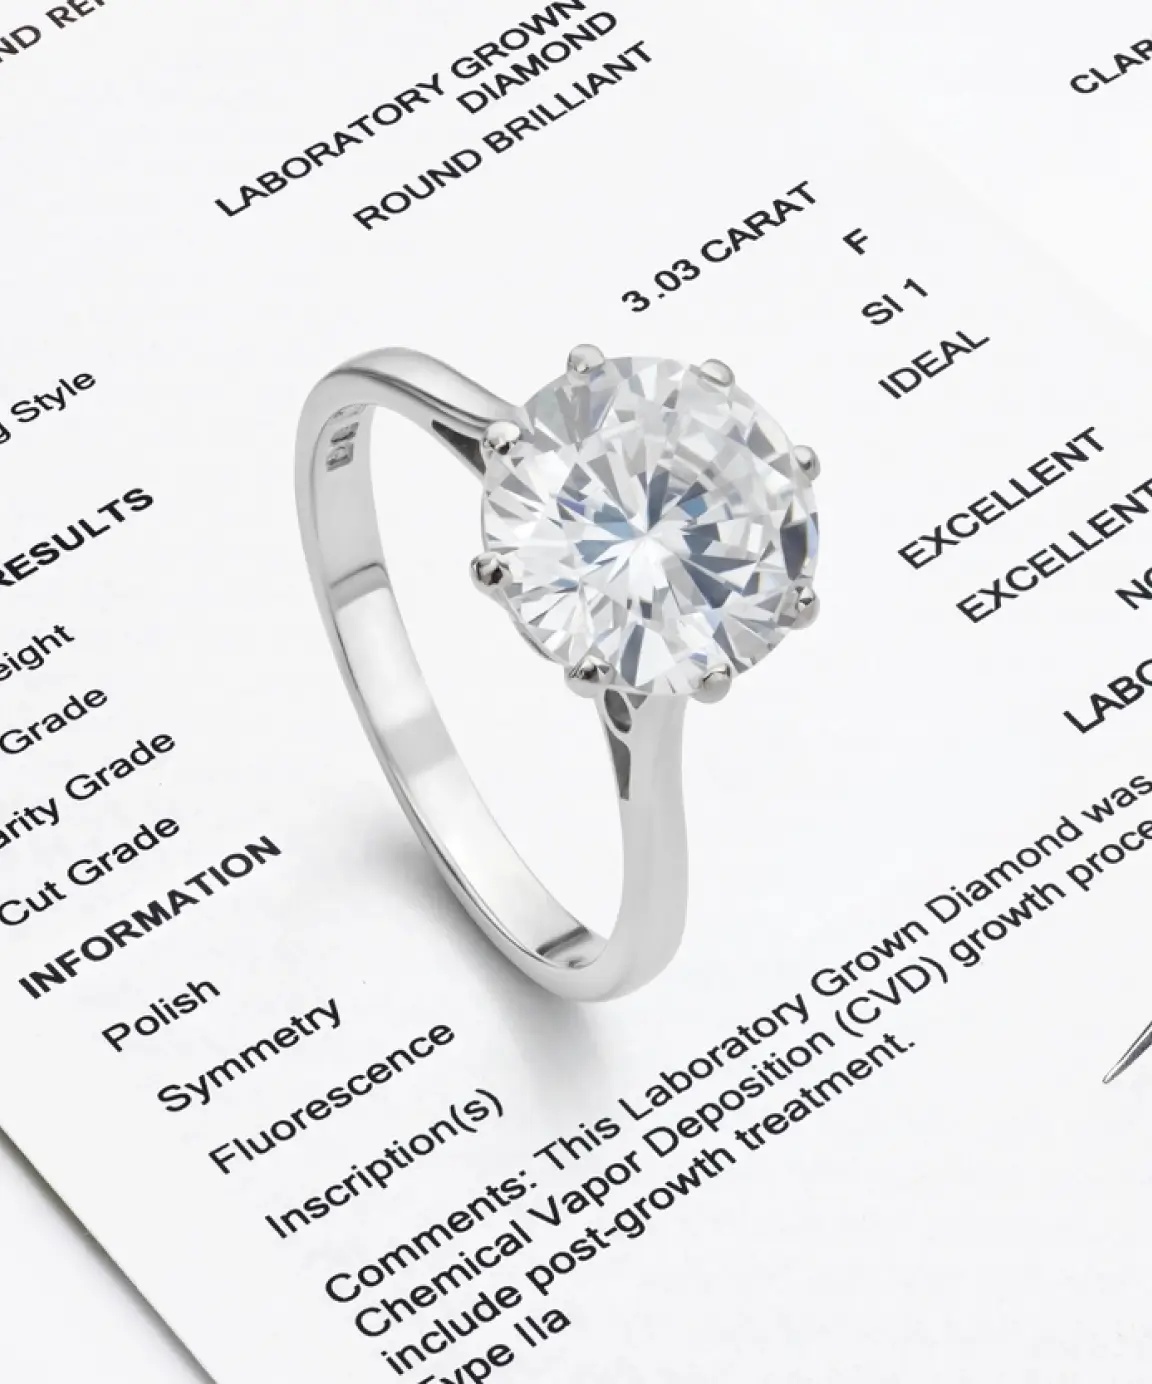 Guarding Your Forever: Engagement Ring Insurance